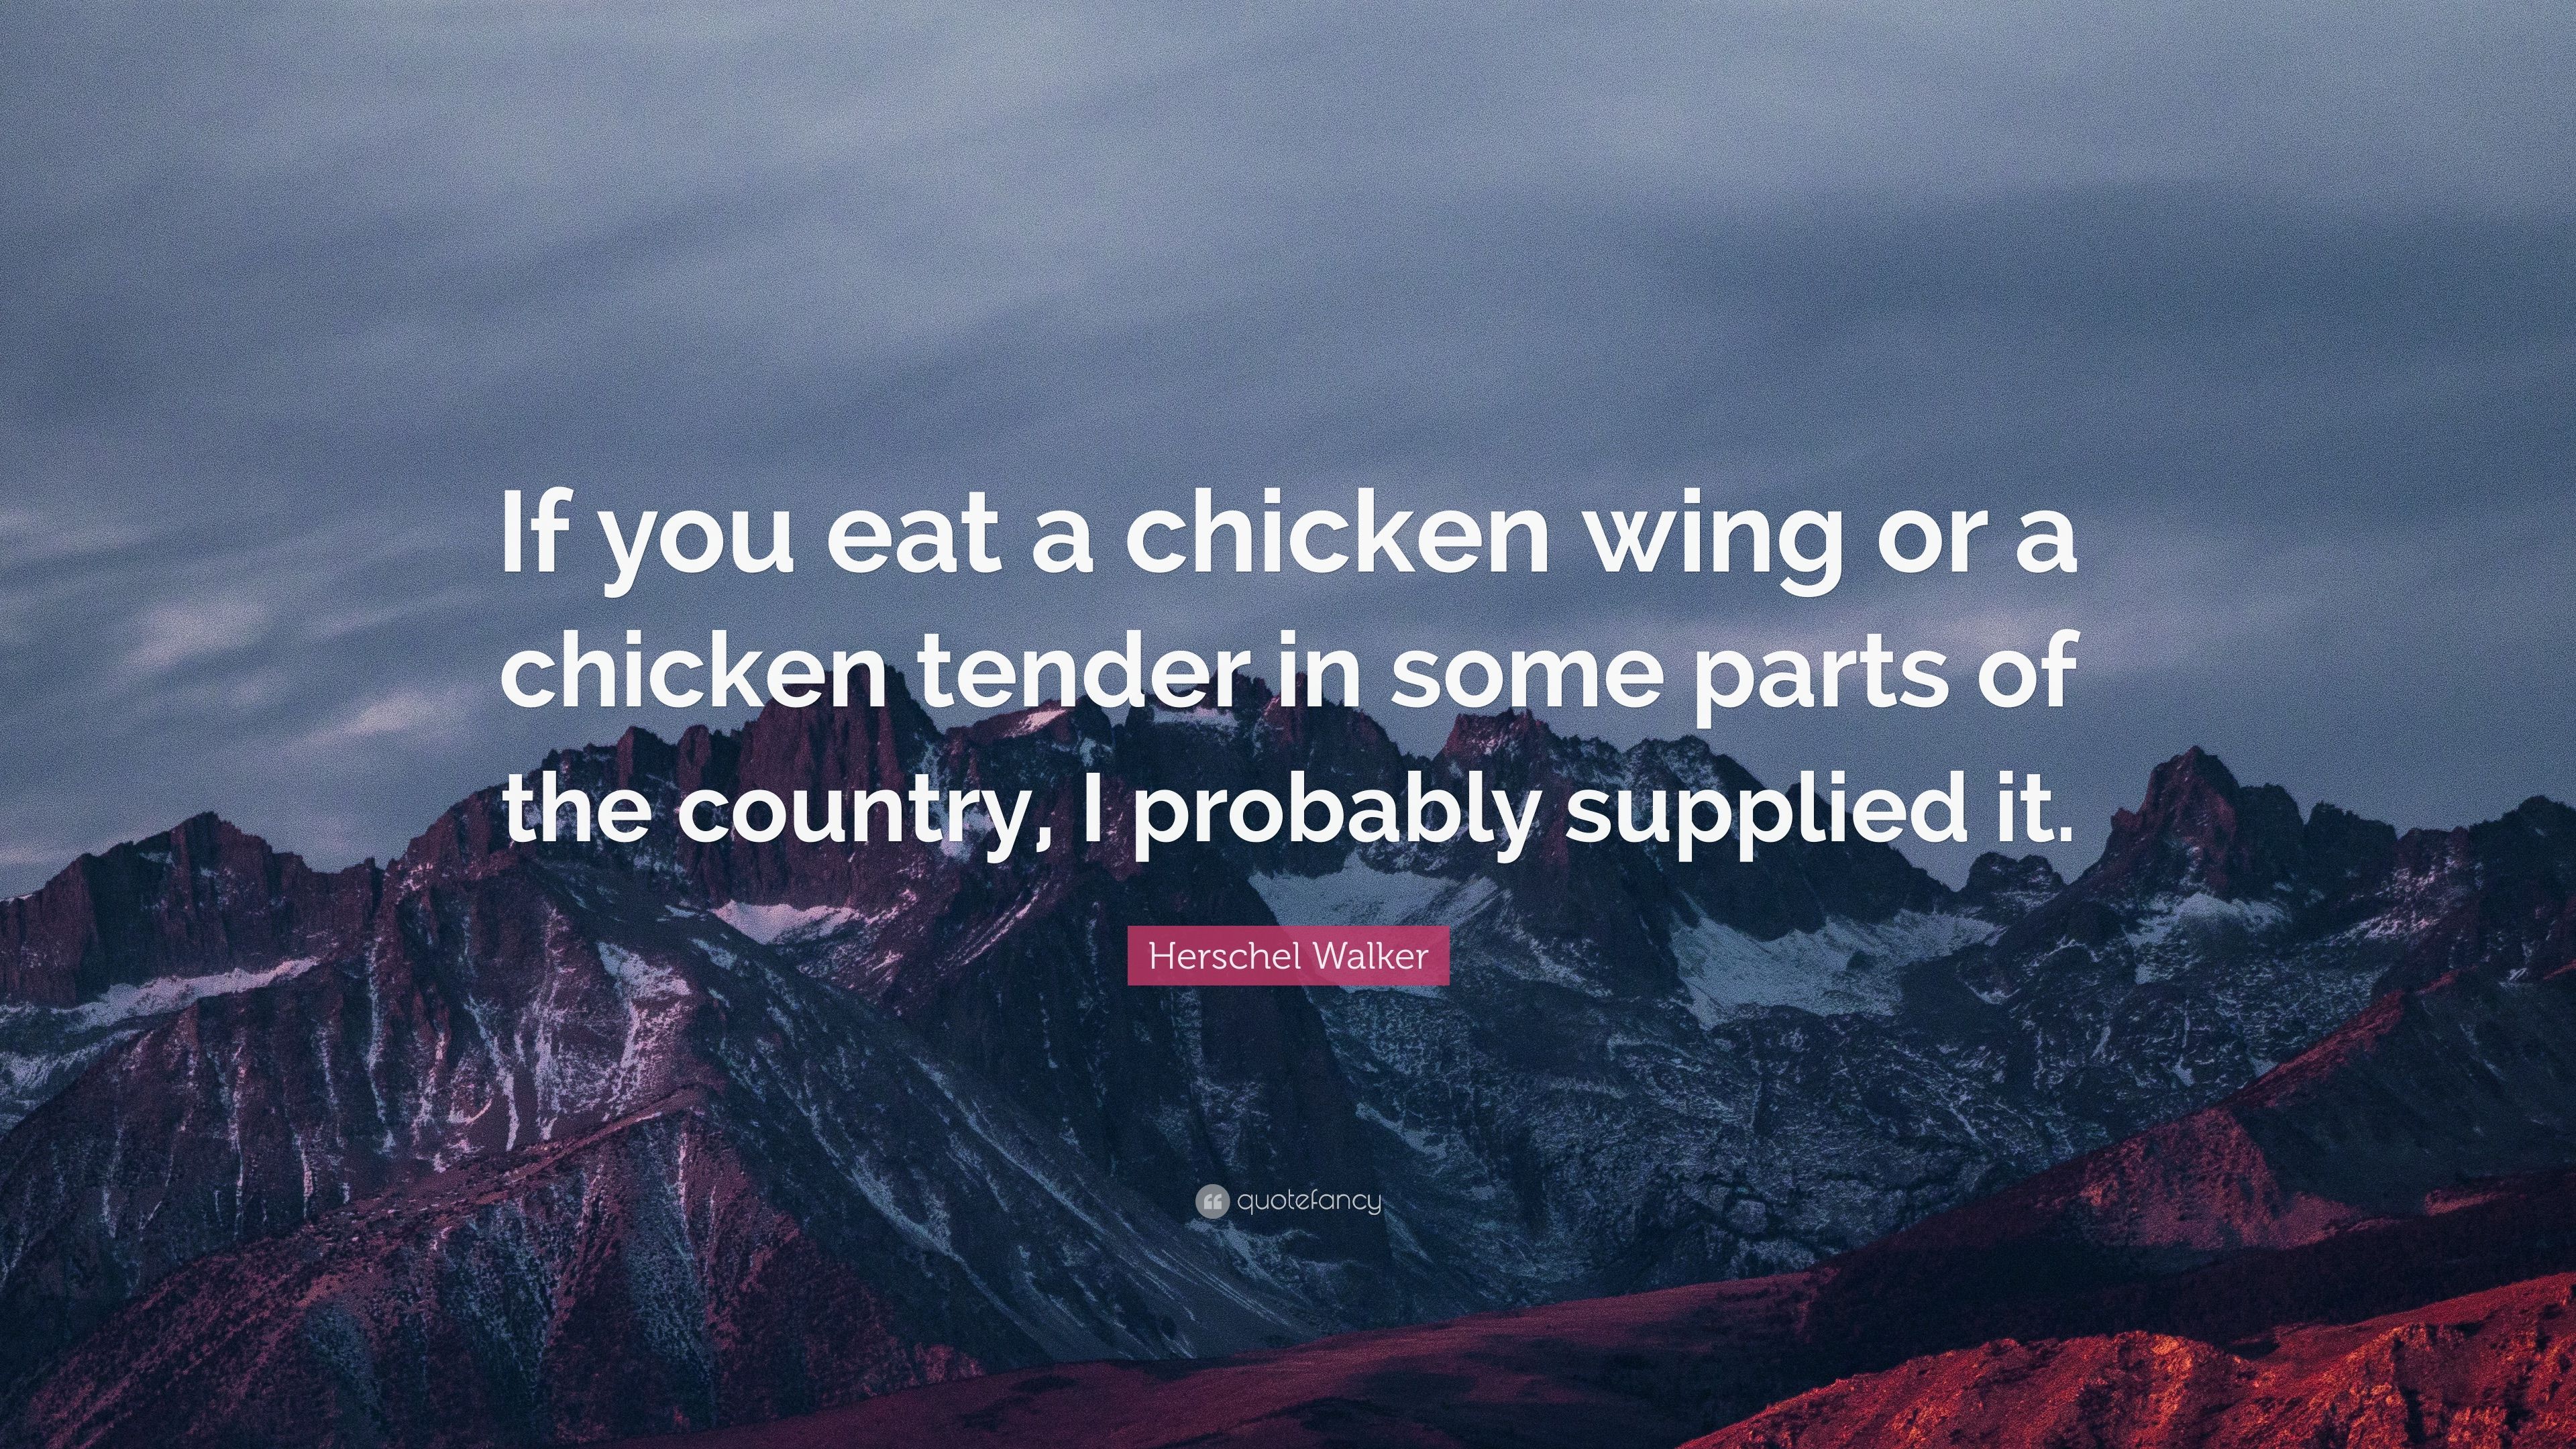 Herschel Walker Quote: “If you eat a chicken wing or a chicken